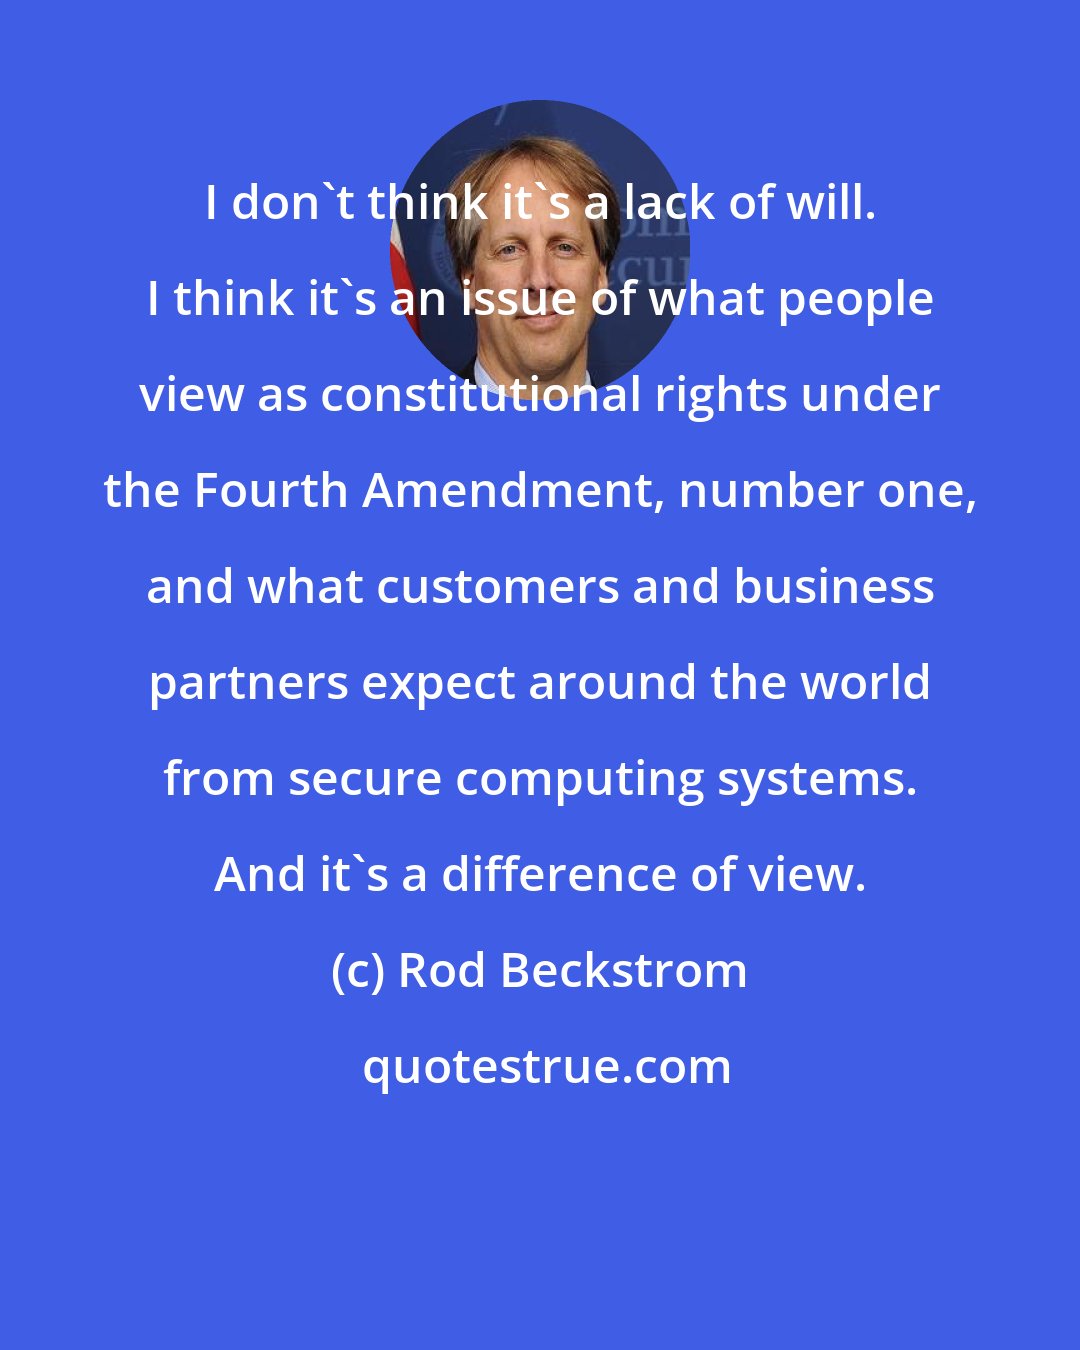 Rod Beckstrom: I don't think it's a lack of will. I think it's an issue of what people view as constitutional rights under the Fourth Amendment, number one, and what customers and business partners expect around the world from secure computing systems. And it's a difference of view.